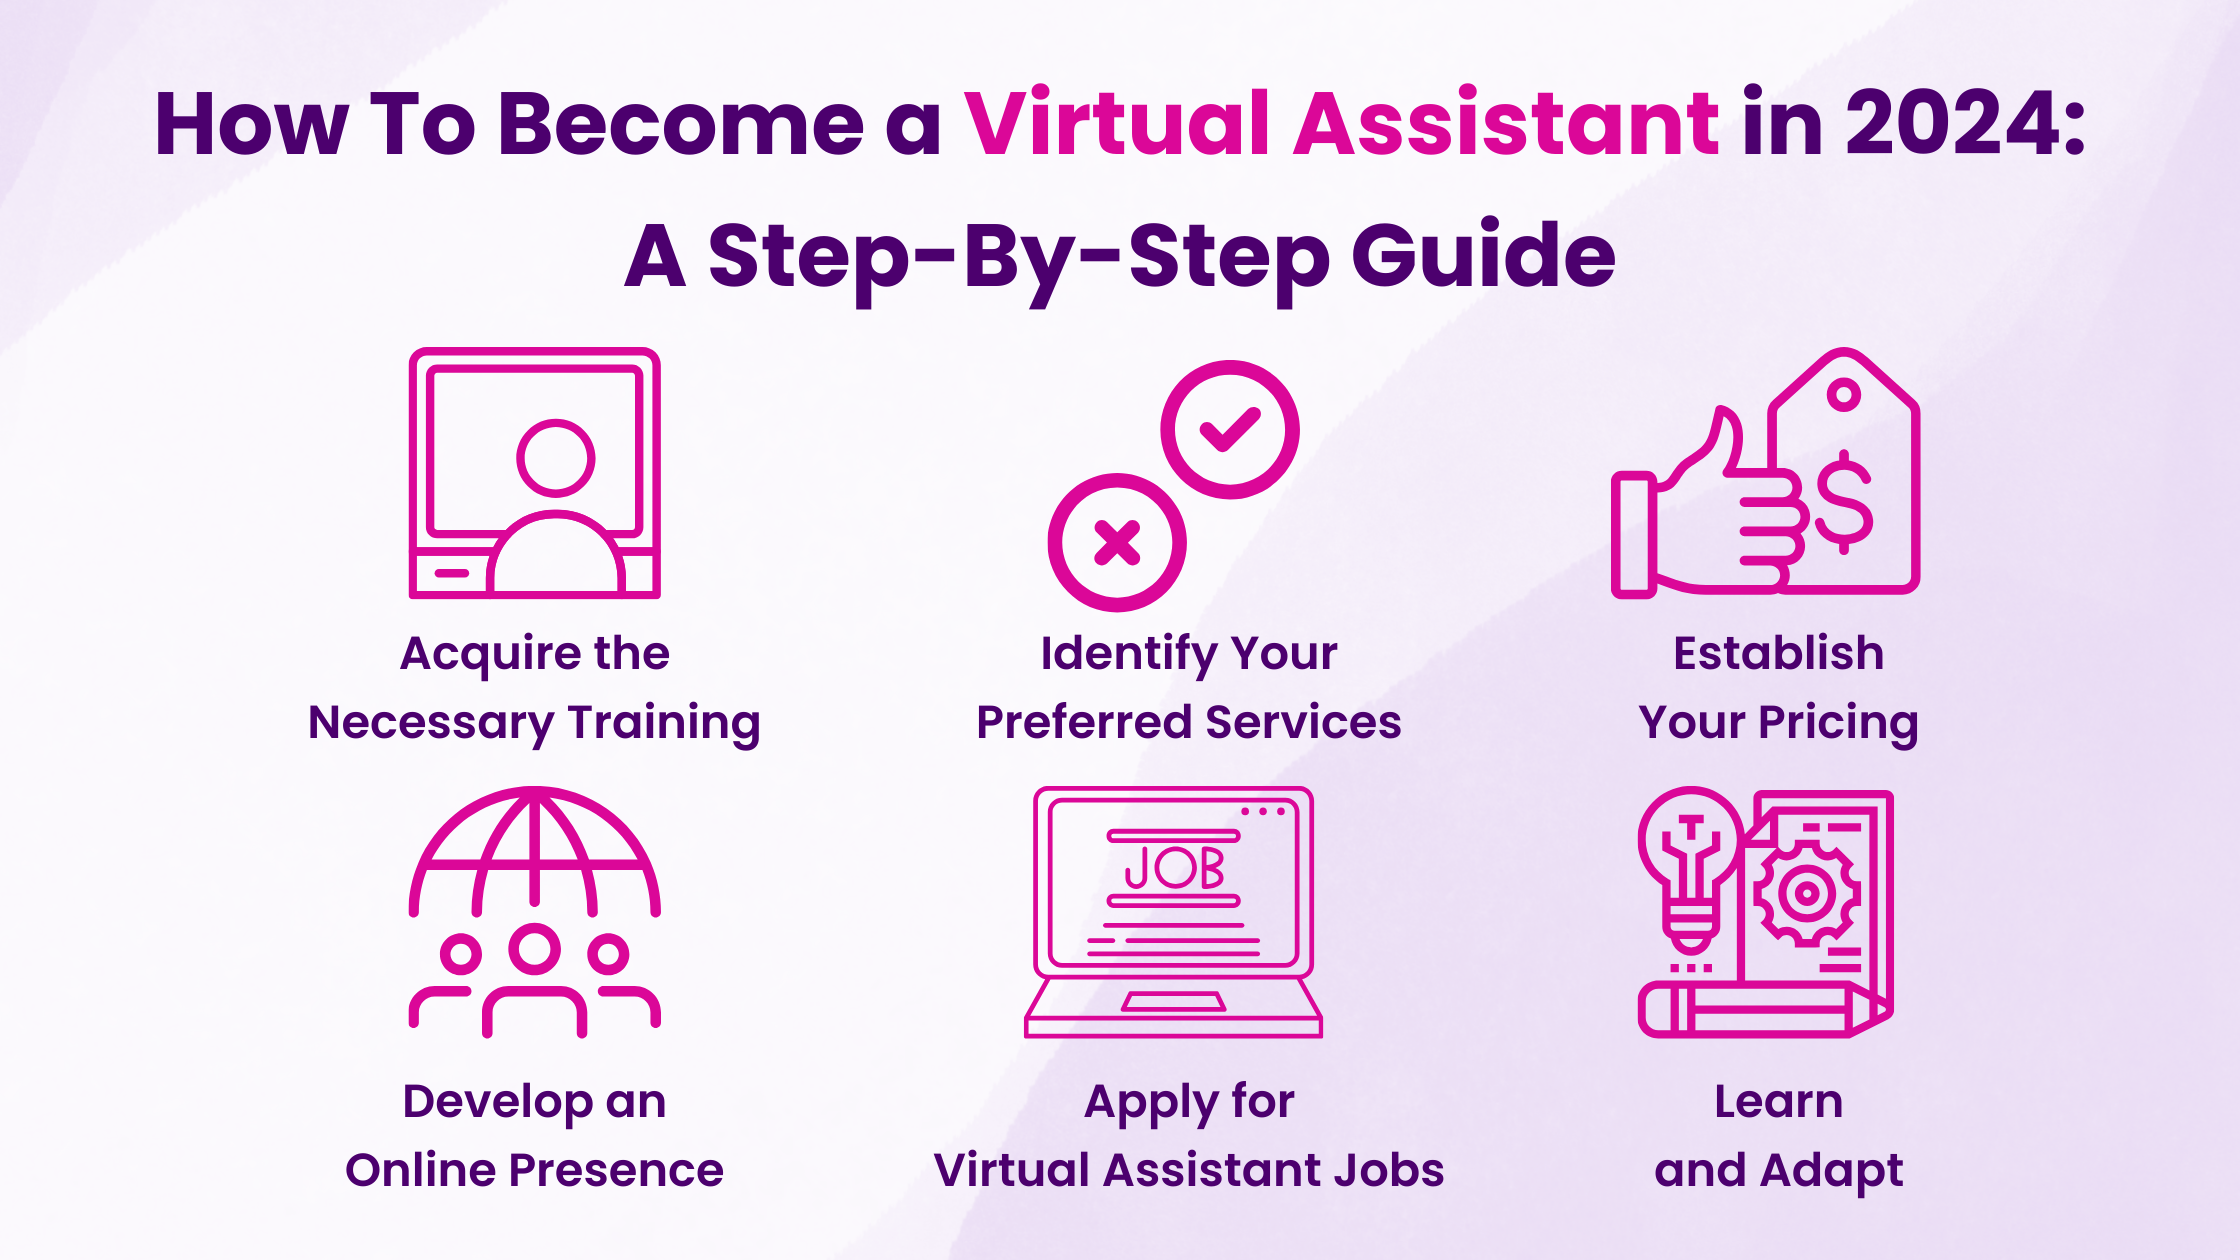 How To Become a Virtual Assistant in 2024 A Step-By-Step Guide